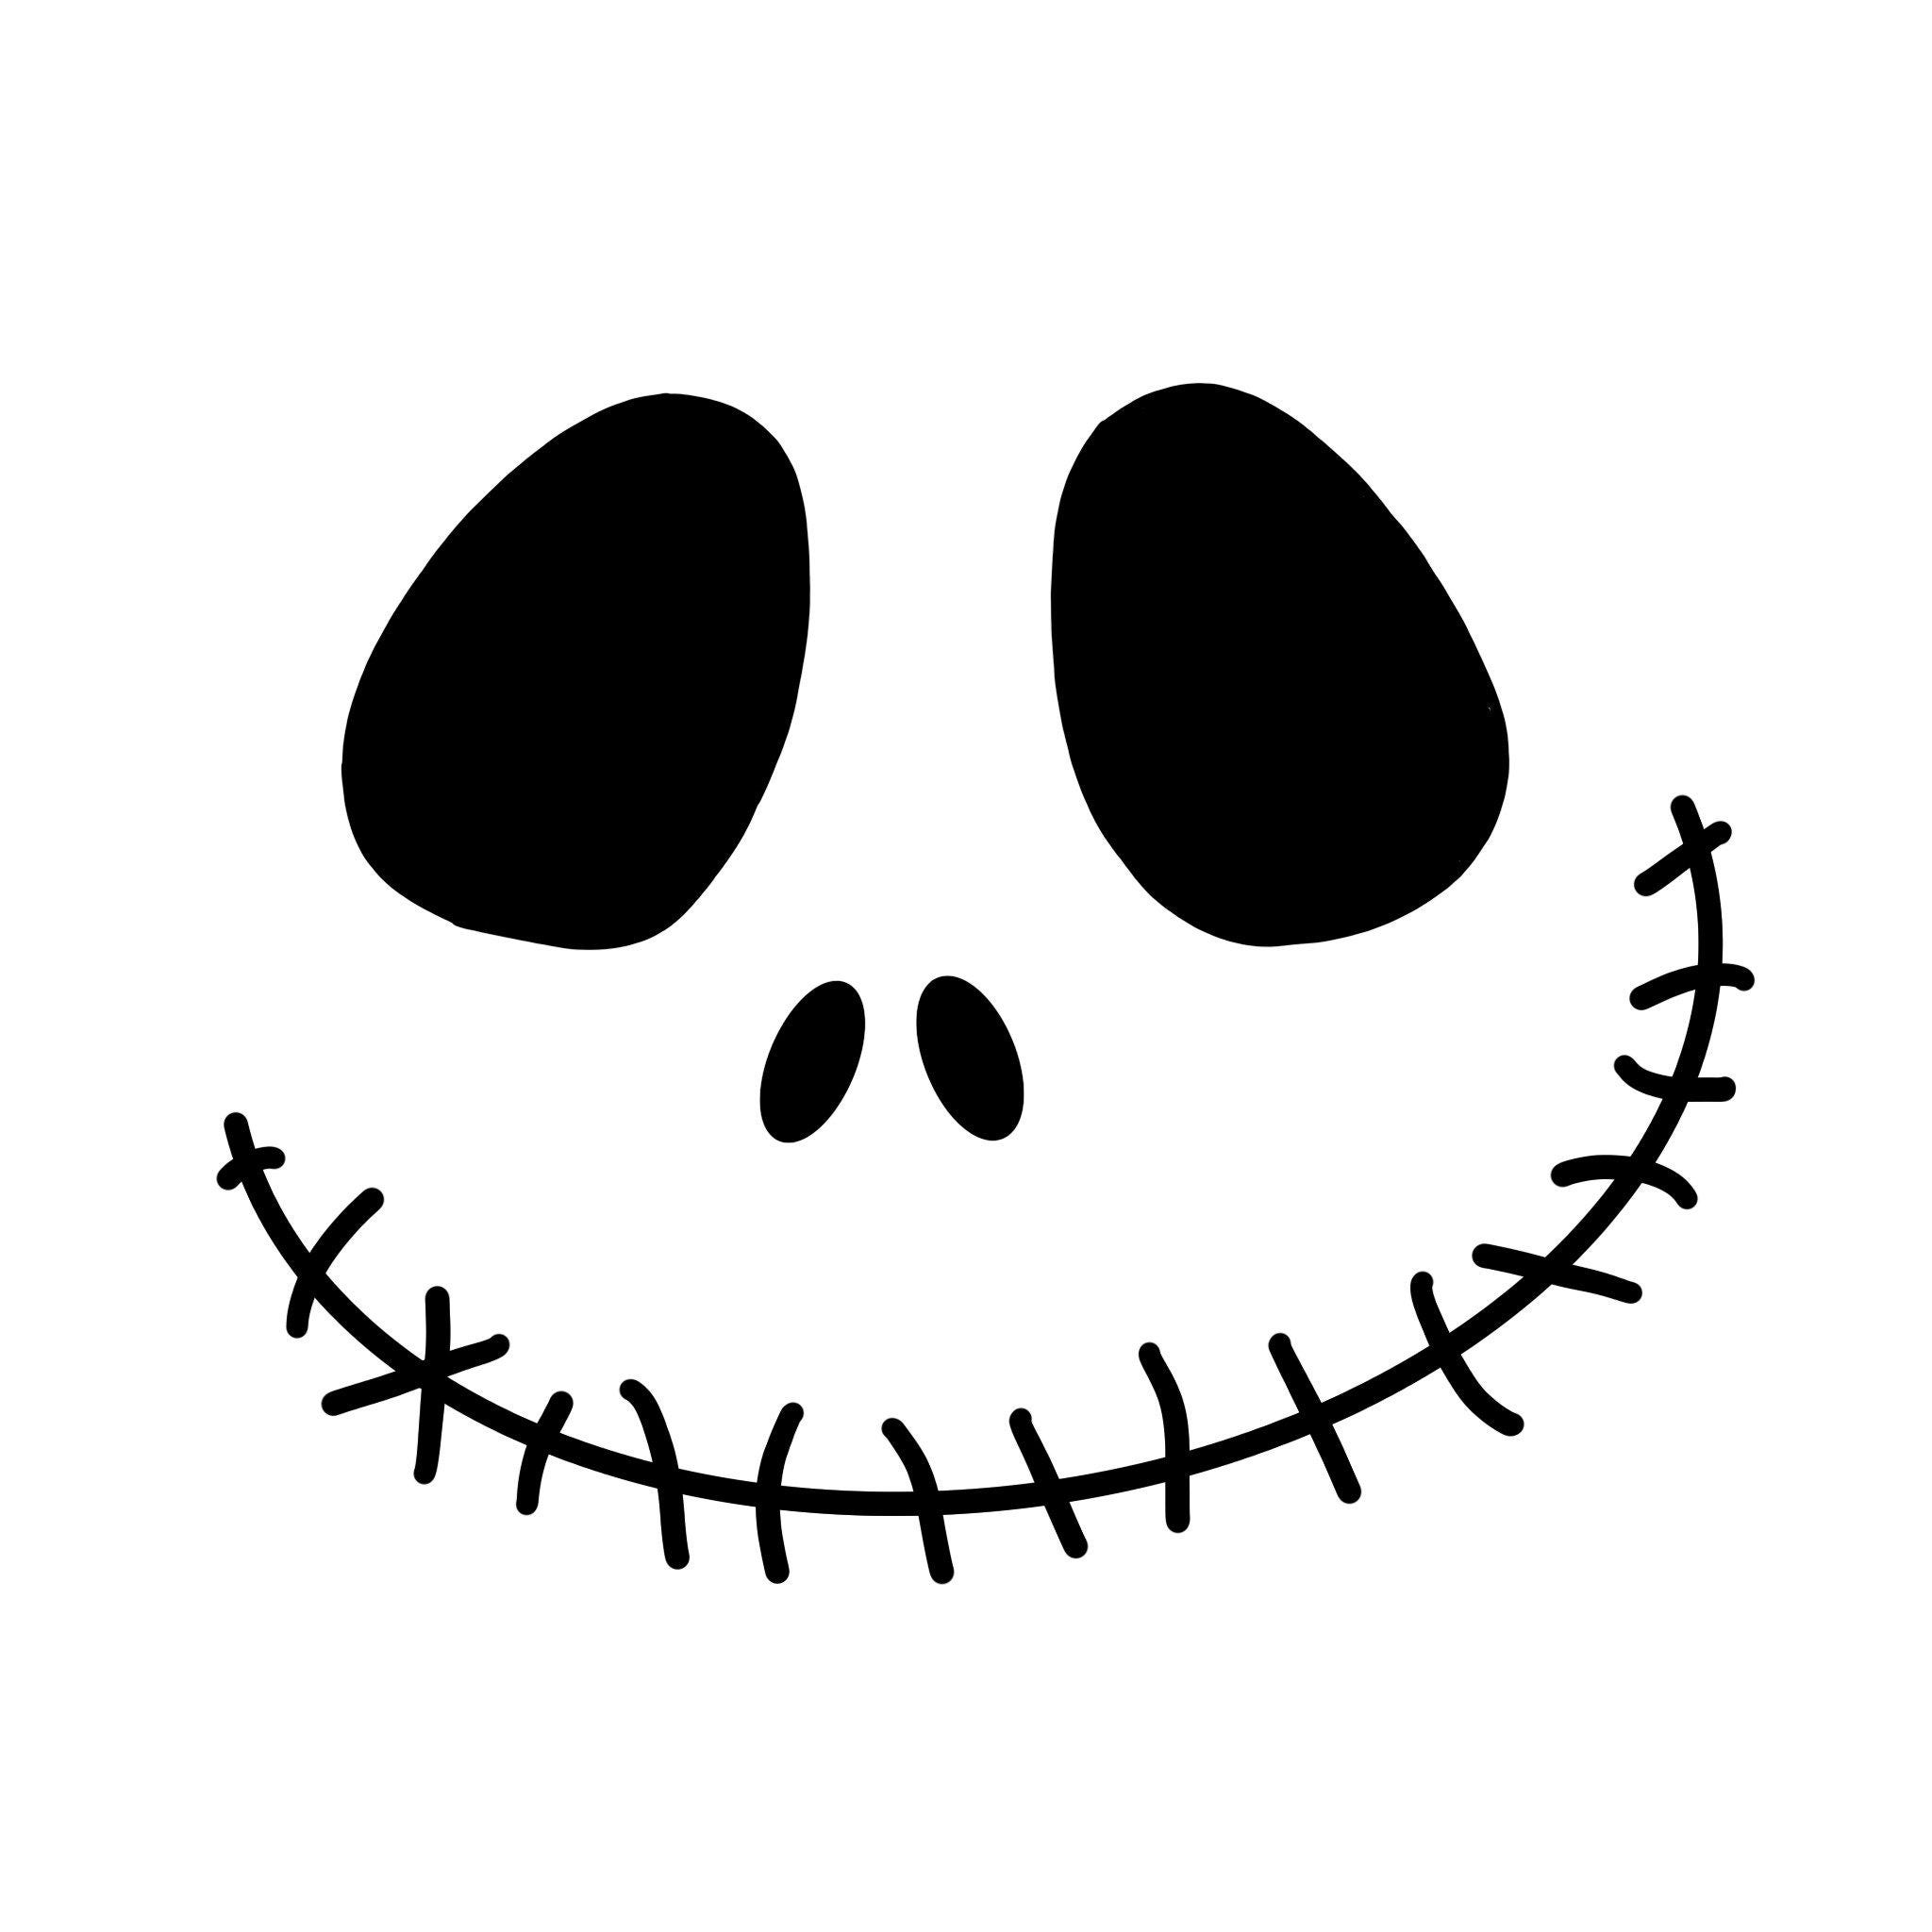 Jack Skellington Face (The Nightmare Before Christmas) Digital Files - SVG/PDF/PNG/Jpeg - Halloween Coloring Pages, Pumpkin Carving Stencil